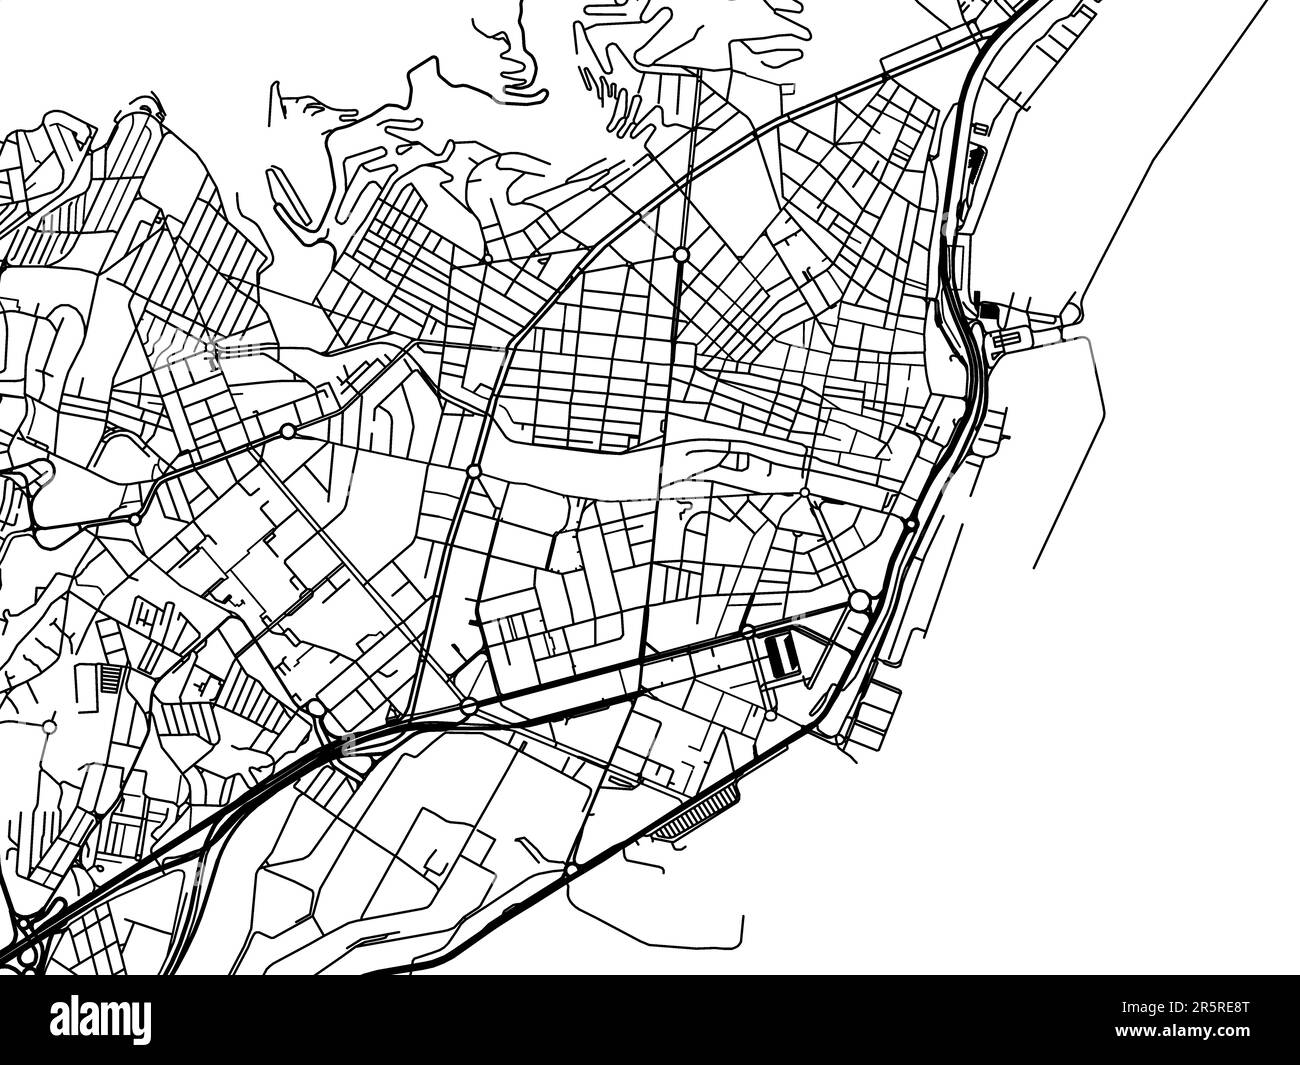 Vector road map of the city of  Santa Cruz de Tenerife in Spain on a white background. Stock Photo